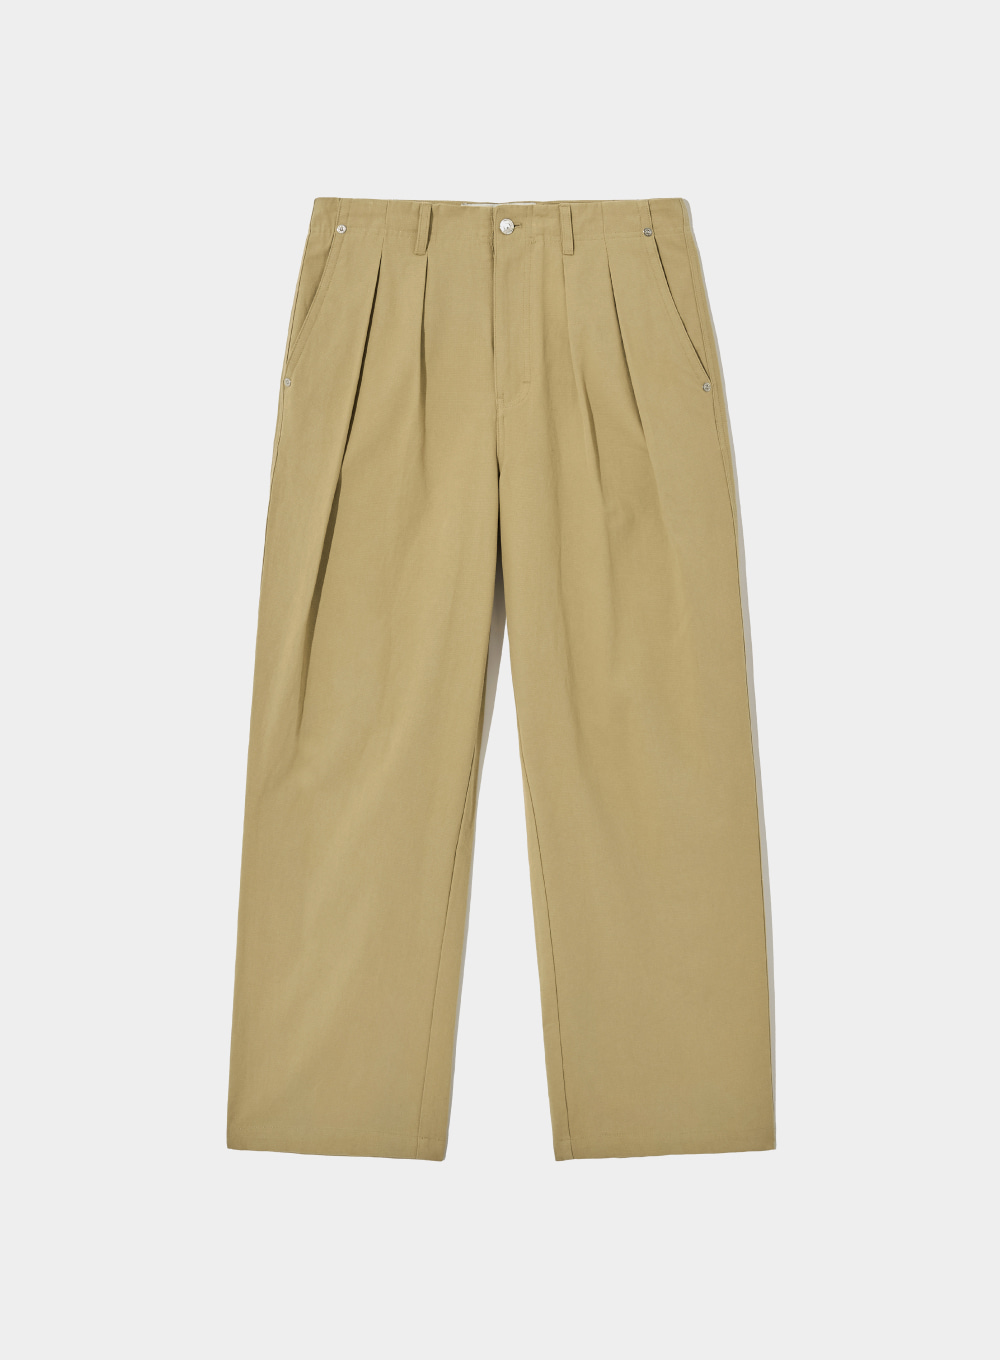 Two Tuck Wide Classic Chino Pants - Classic Beige